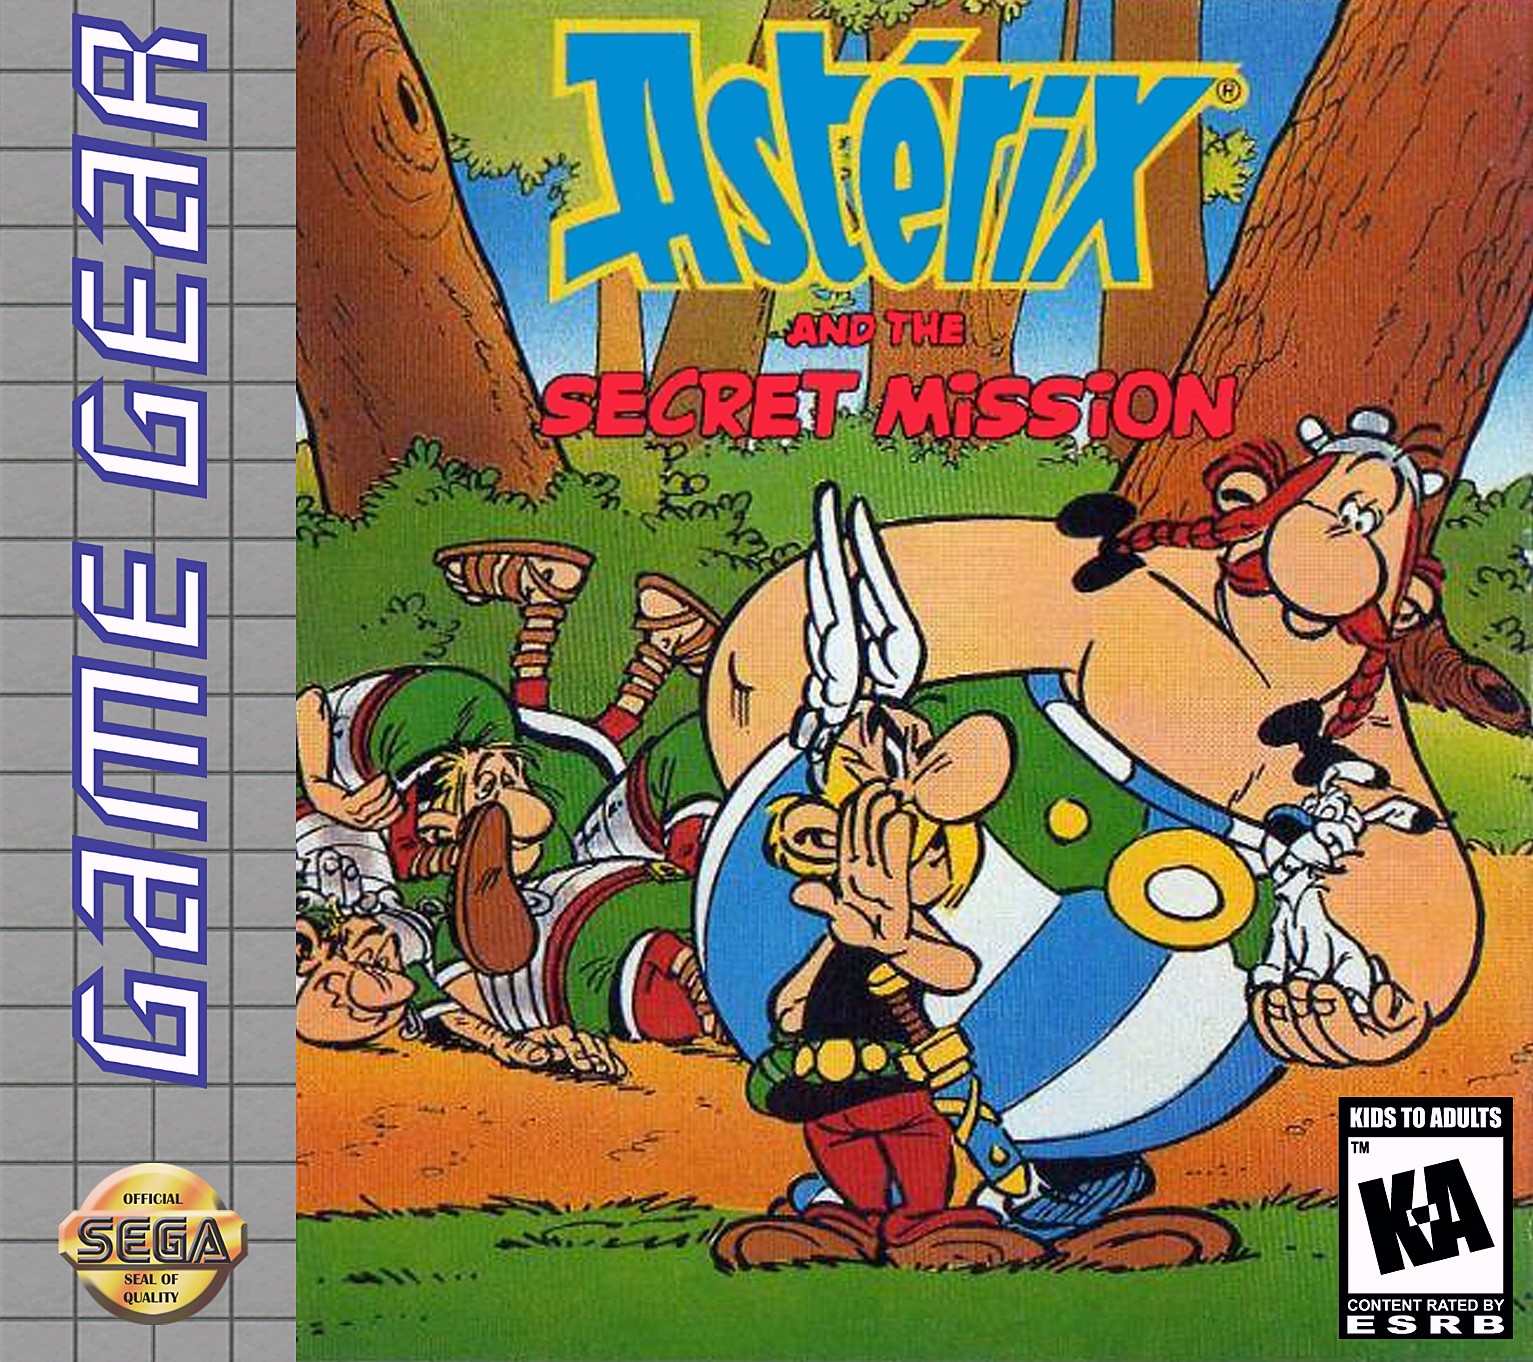 'Asterix and the Secret Mission'